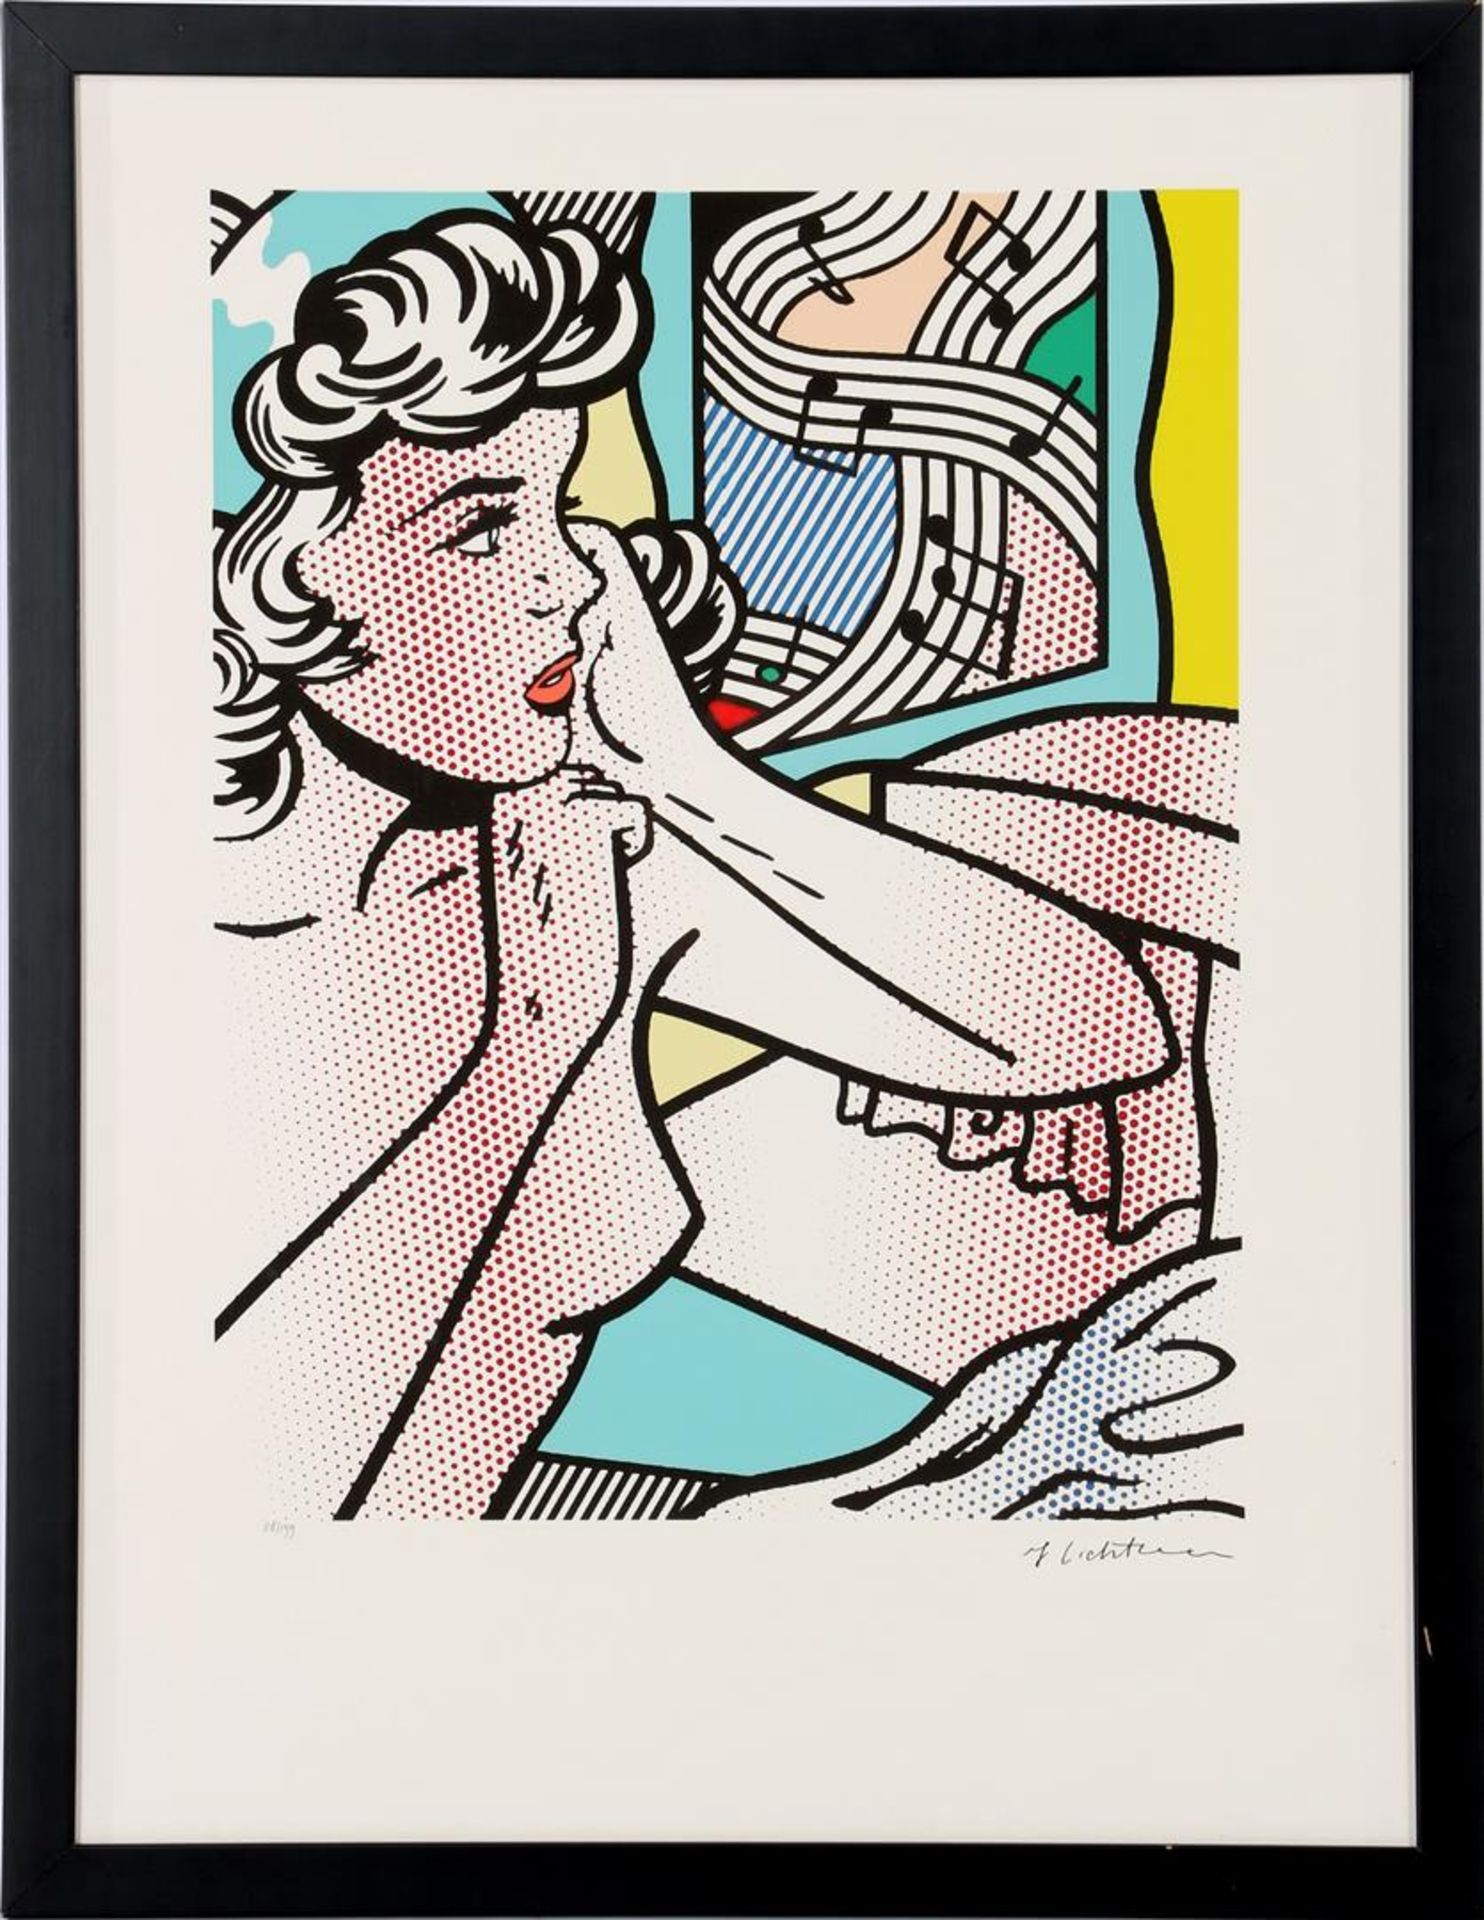 Signed J Lichtenstein, Composition with woman and music